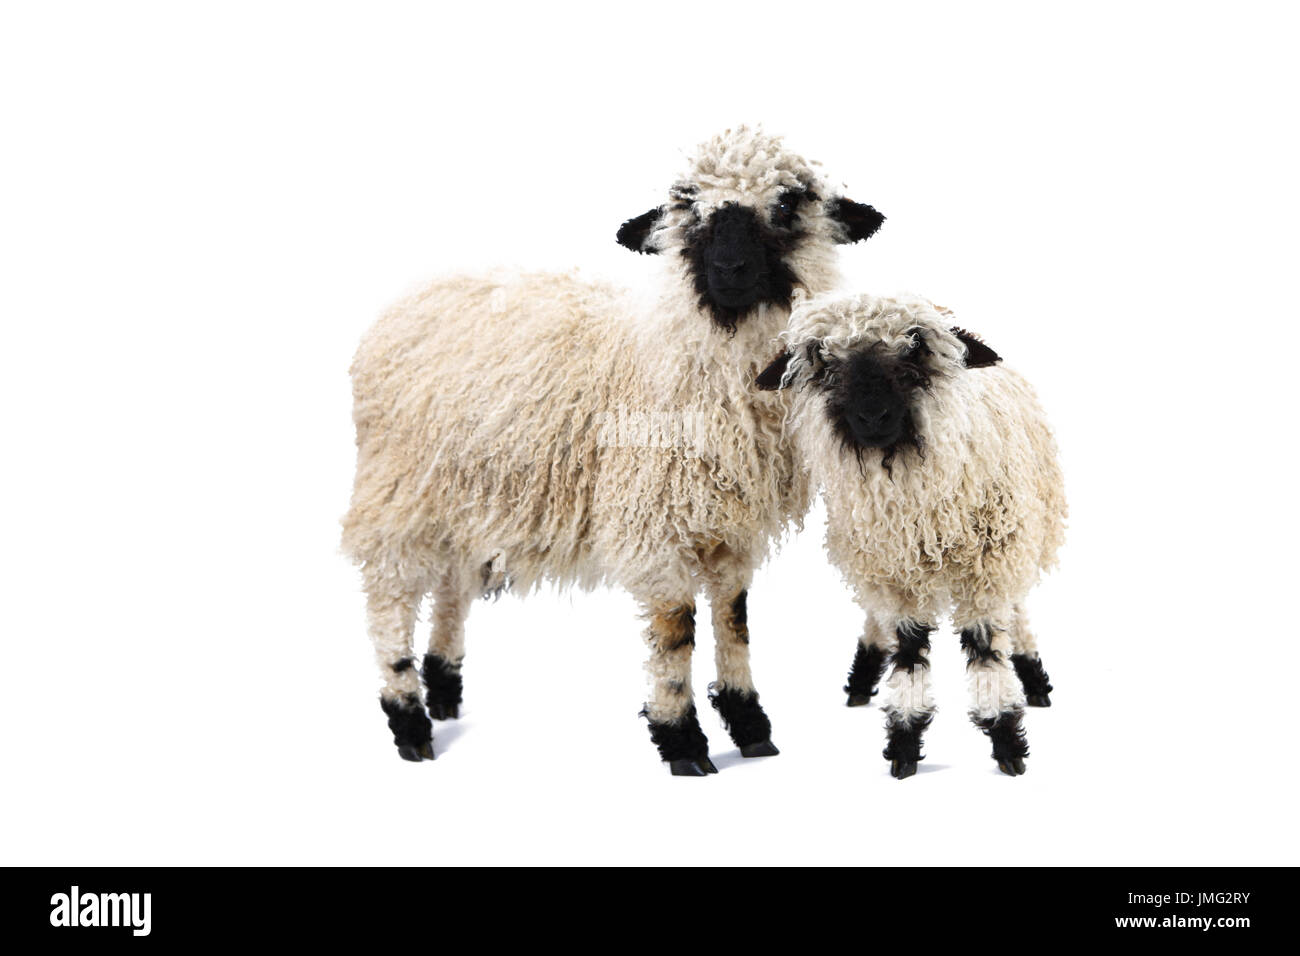 Valais Blacknose Sheep. Two lambs standing. Studio picture against a white background. Germany Stock Photo